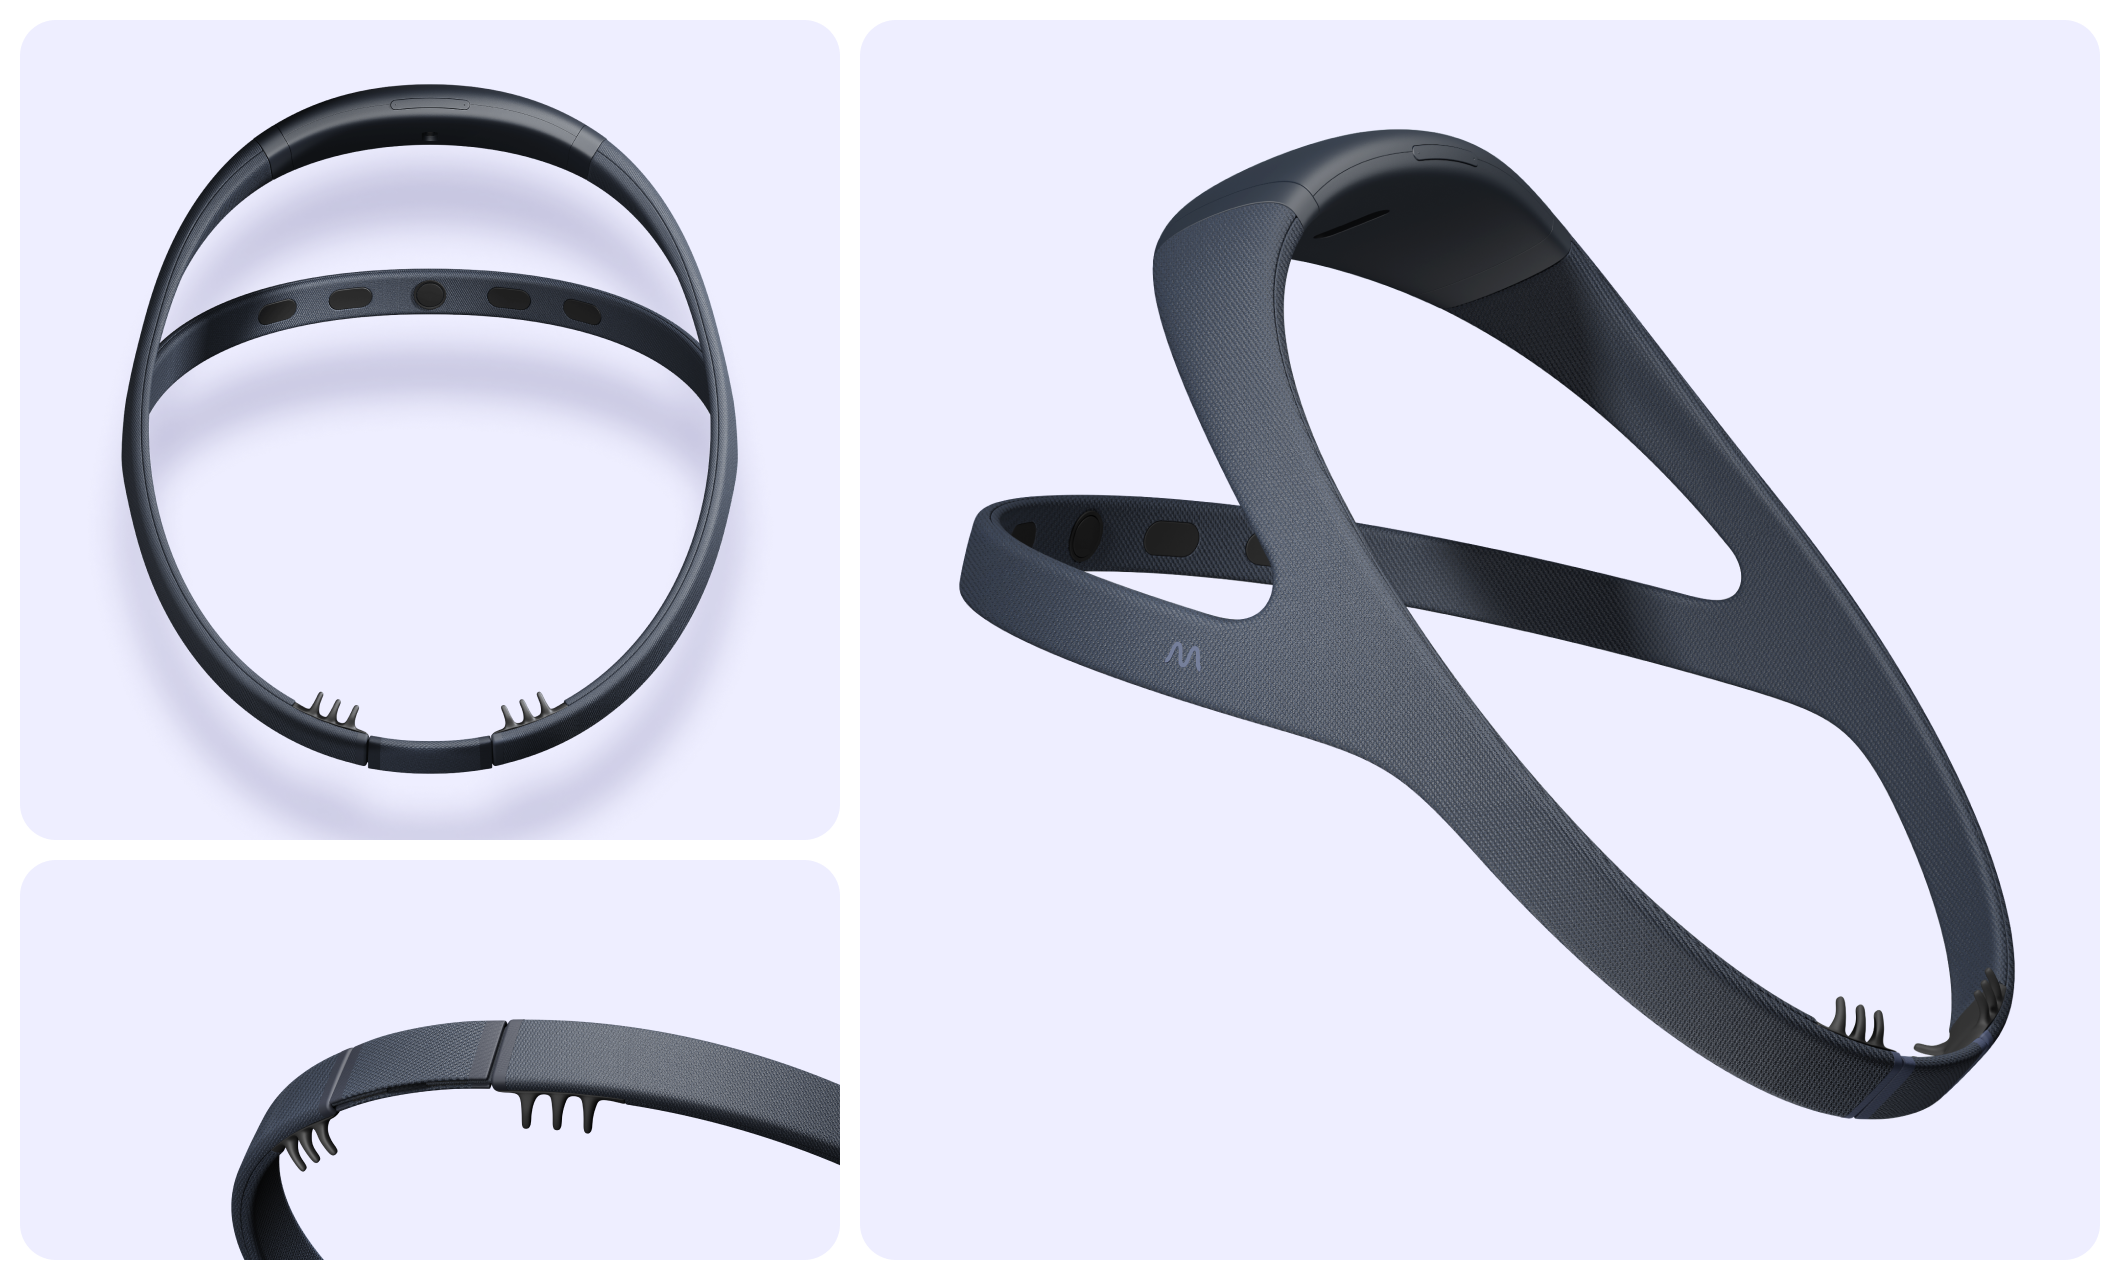 The Dreem 3S Headband shown from top, bottom, and 3/4 views